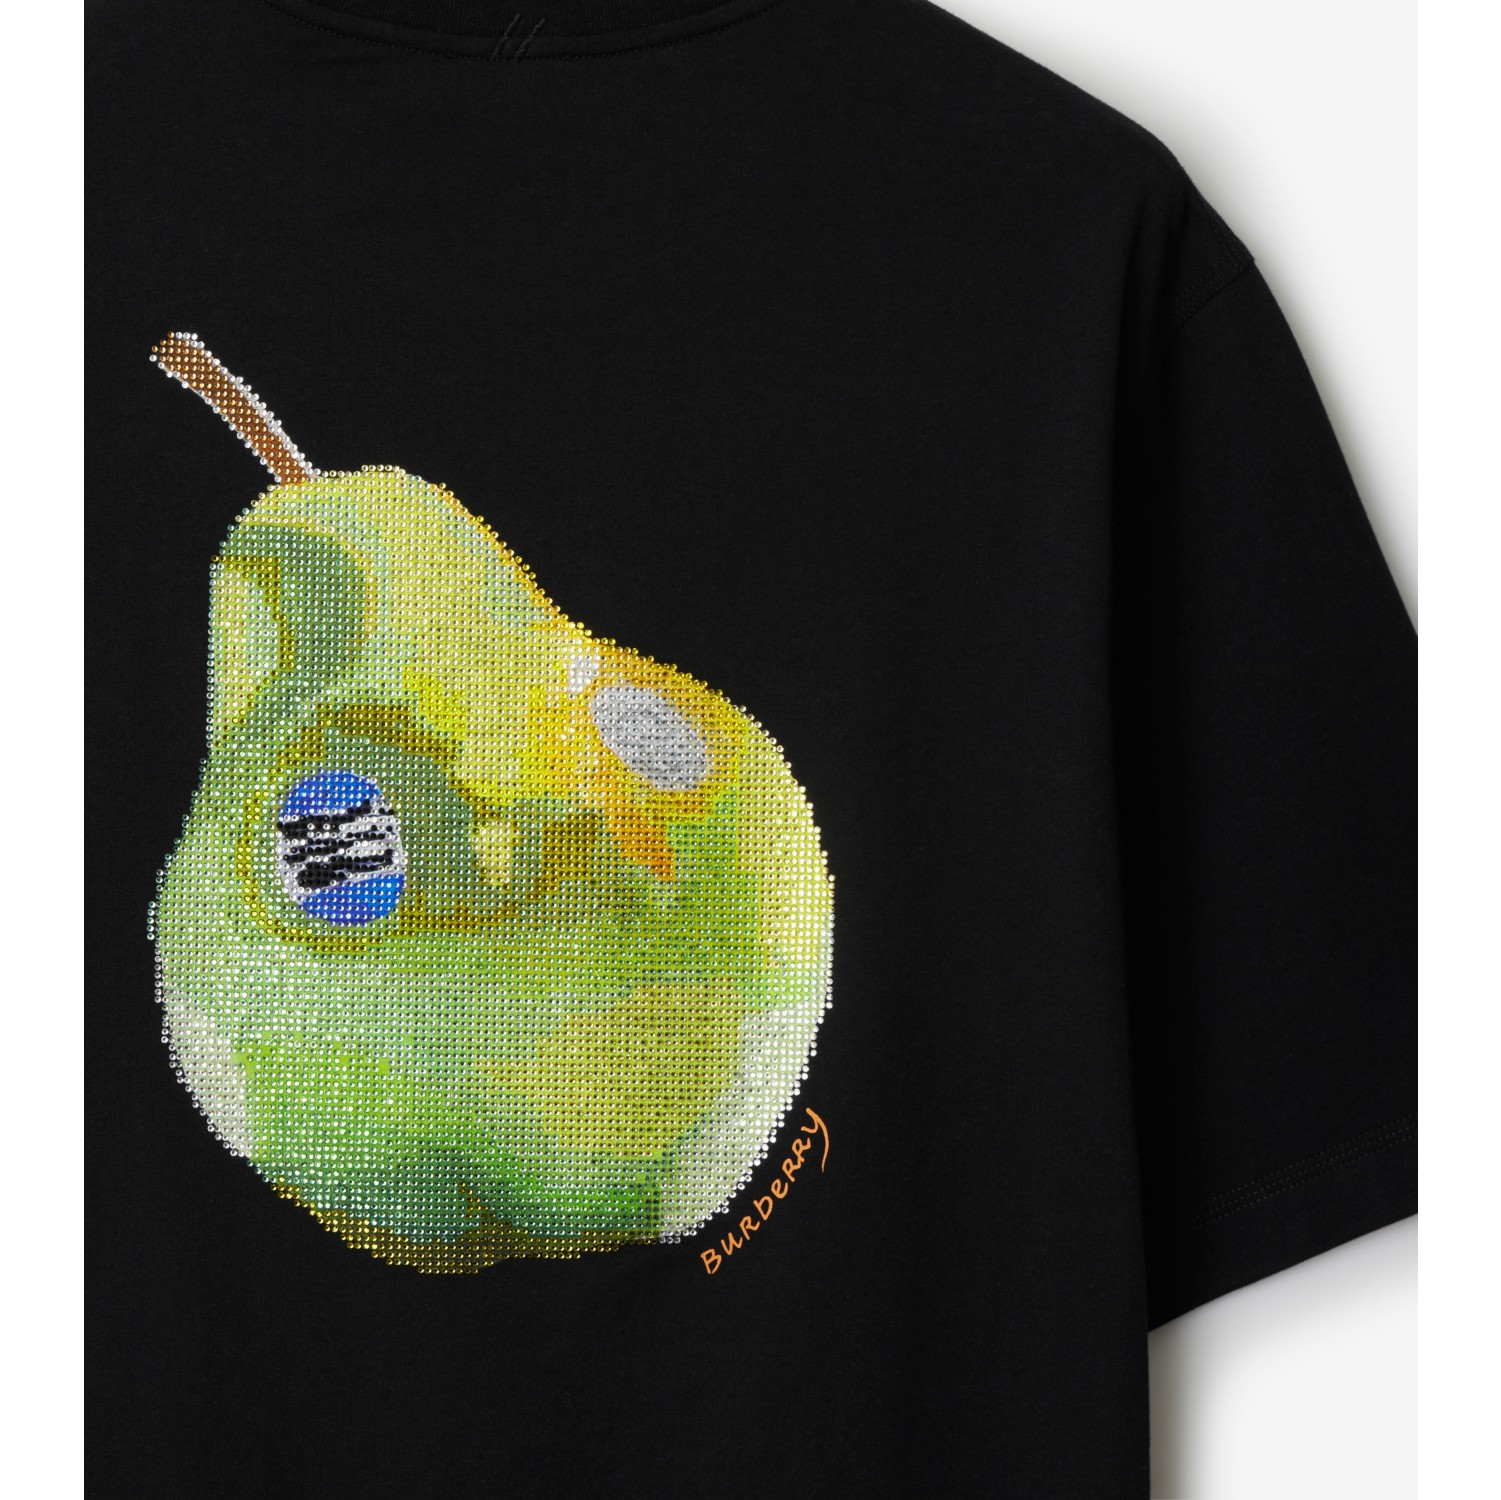 Crystal Pear Cotton T-shirt